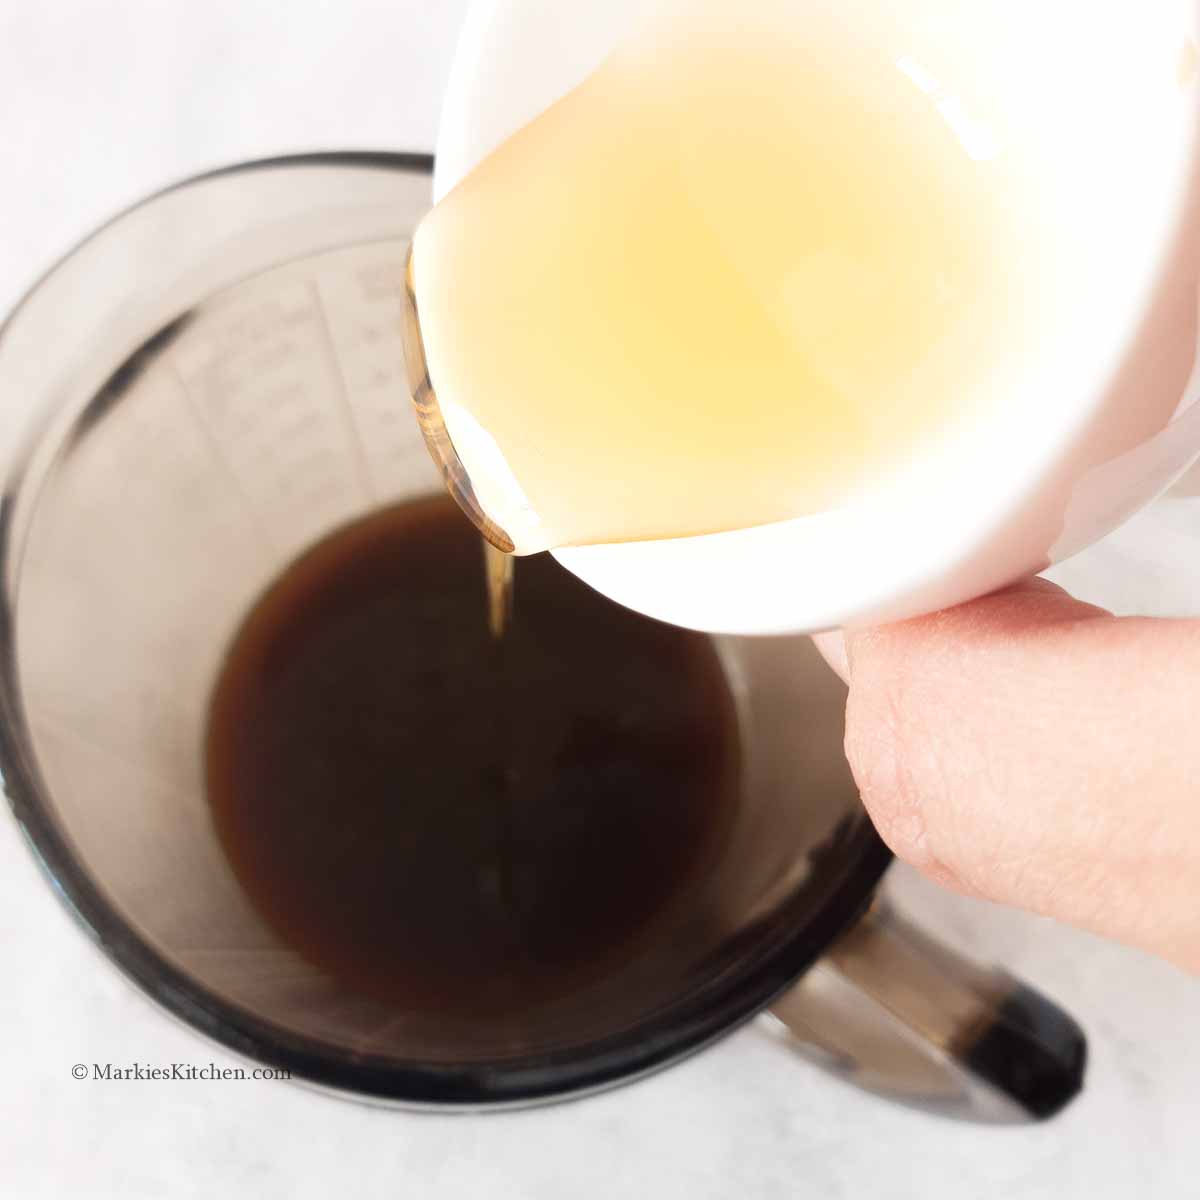 A photo of a hand pouring a yellow syrup to a jug with coffee.